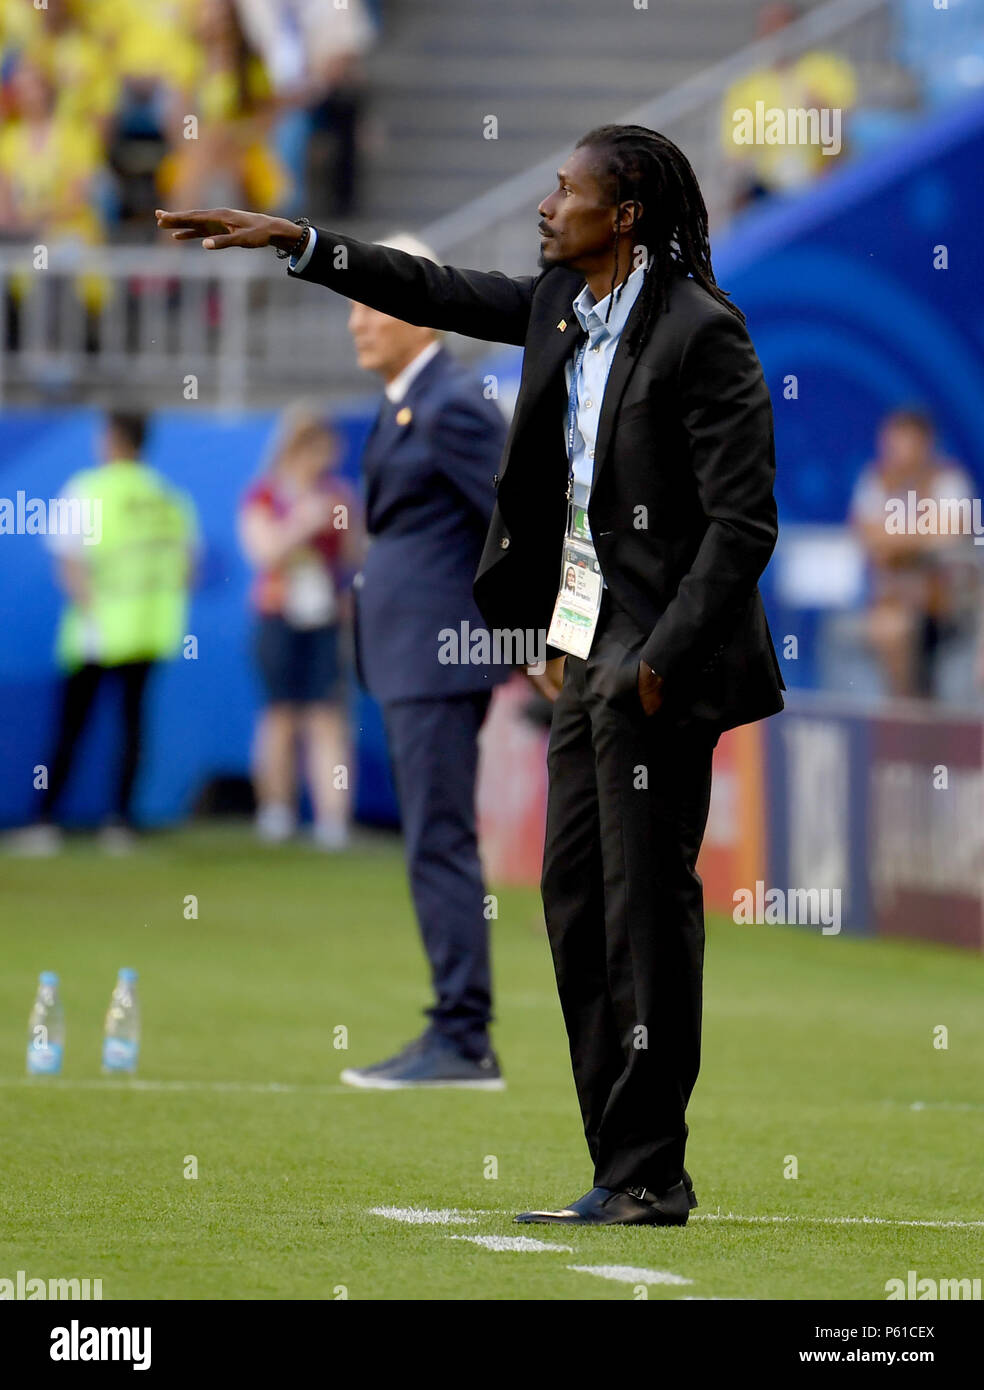 Samara, Russia. 28th June, 2018. Head coach Aliou Cisse of Senegal gives instructions to players during the 2018 FIFA World Cup Group H match between Colombia and Senegal in Samara, Russia, June 28, 2018. Credit: Chen Cheng/Xinhua/Alamy Live News Stock Photo